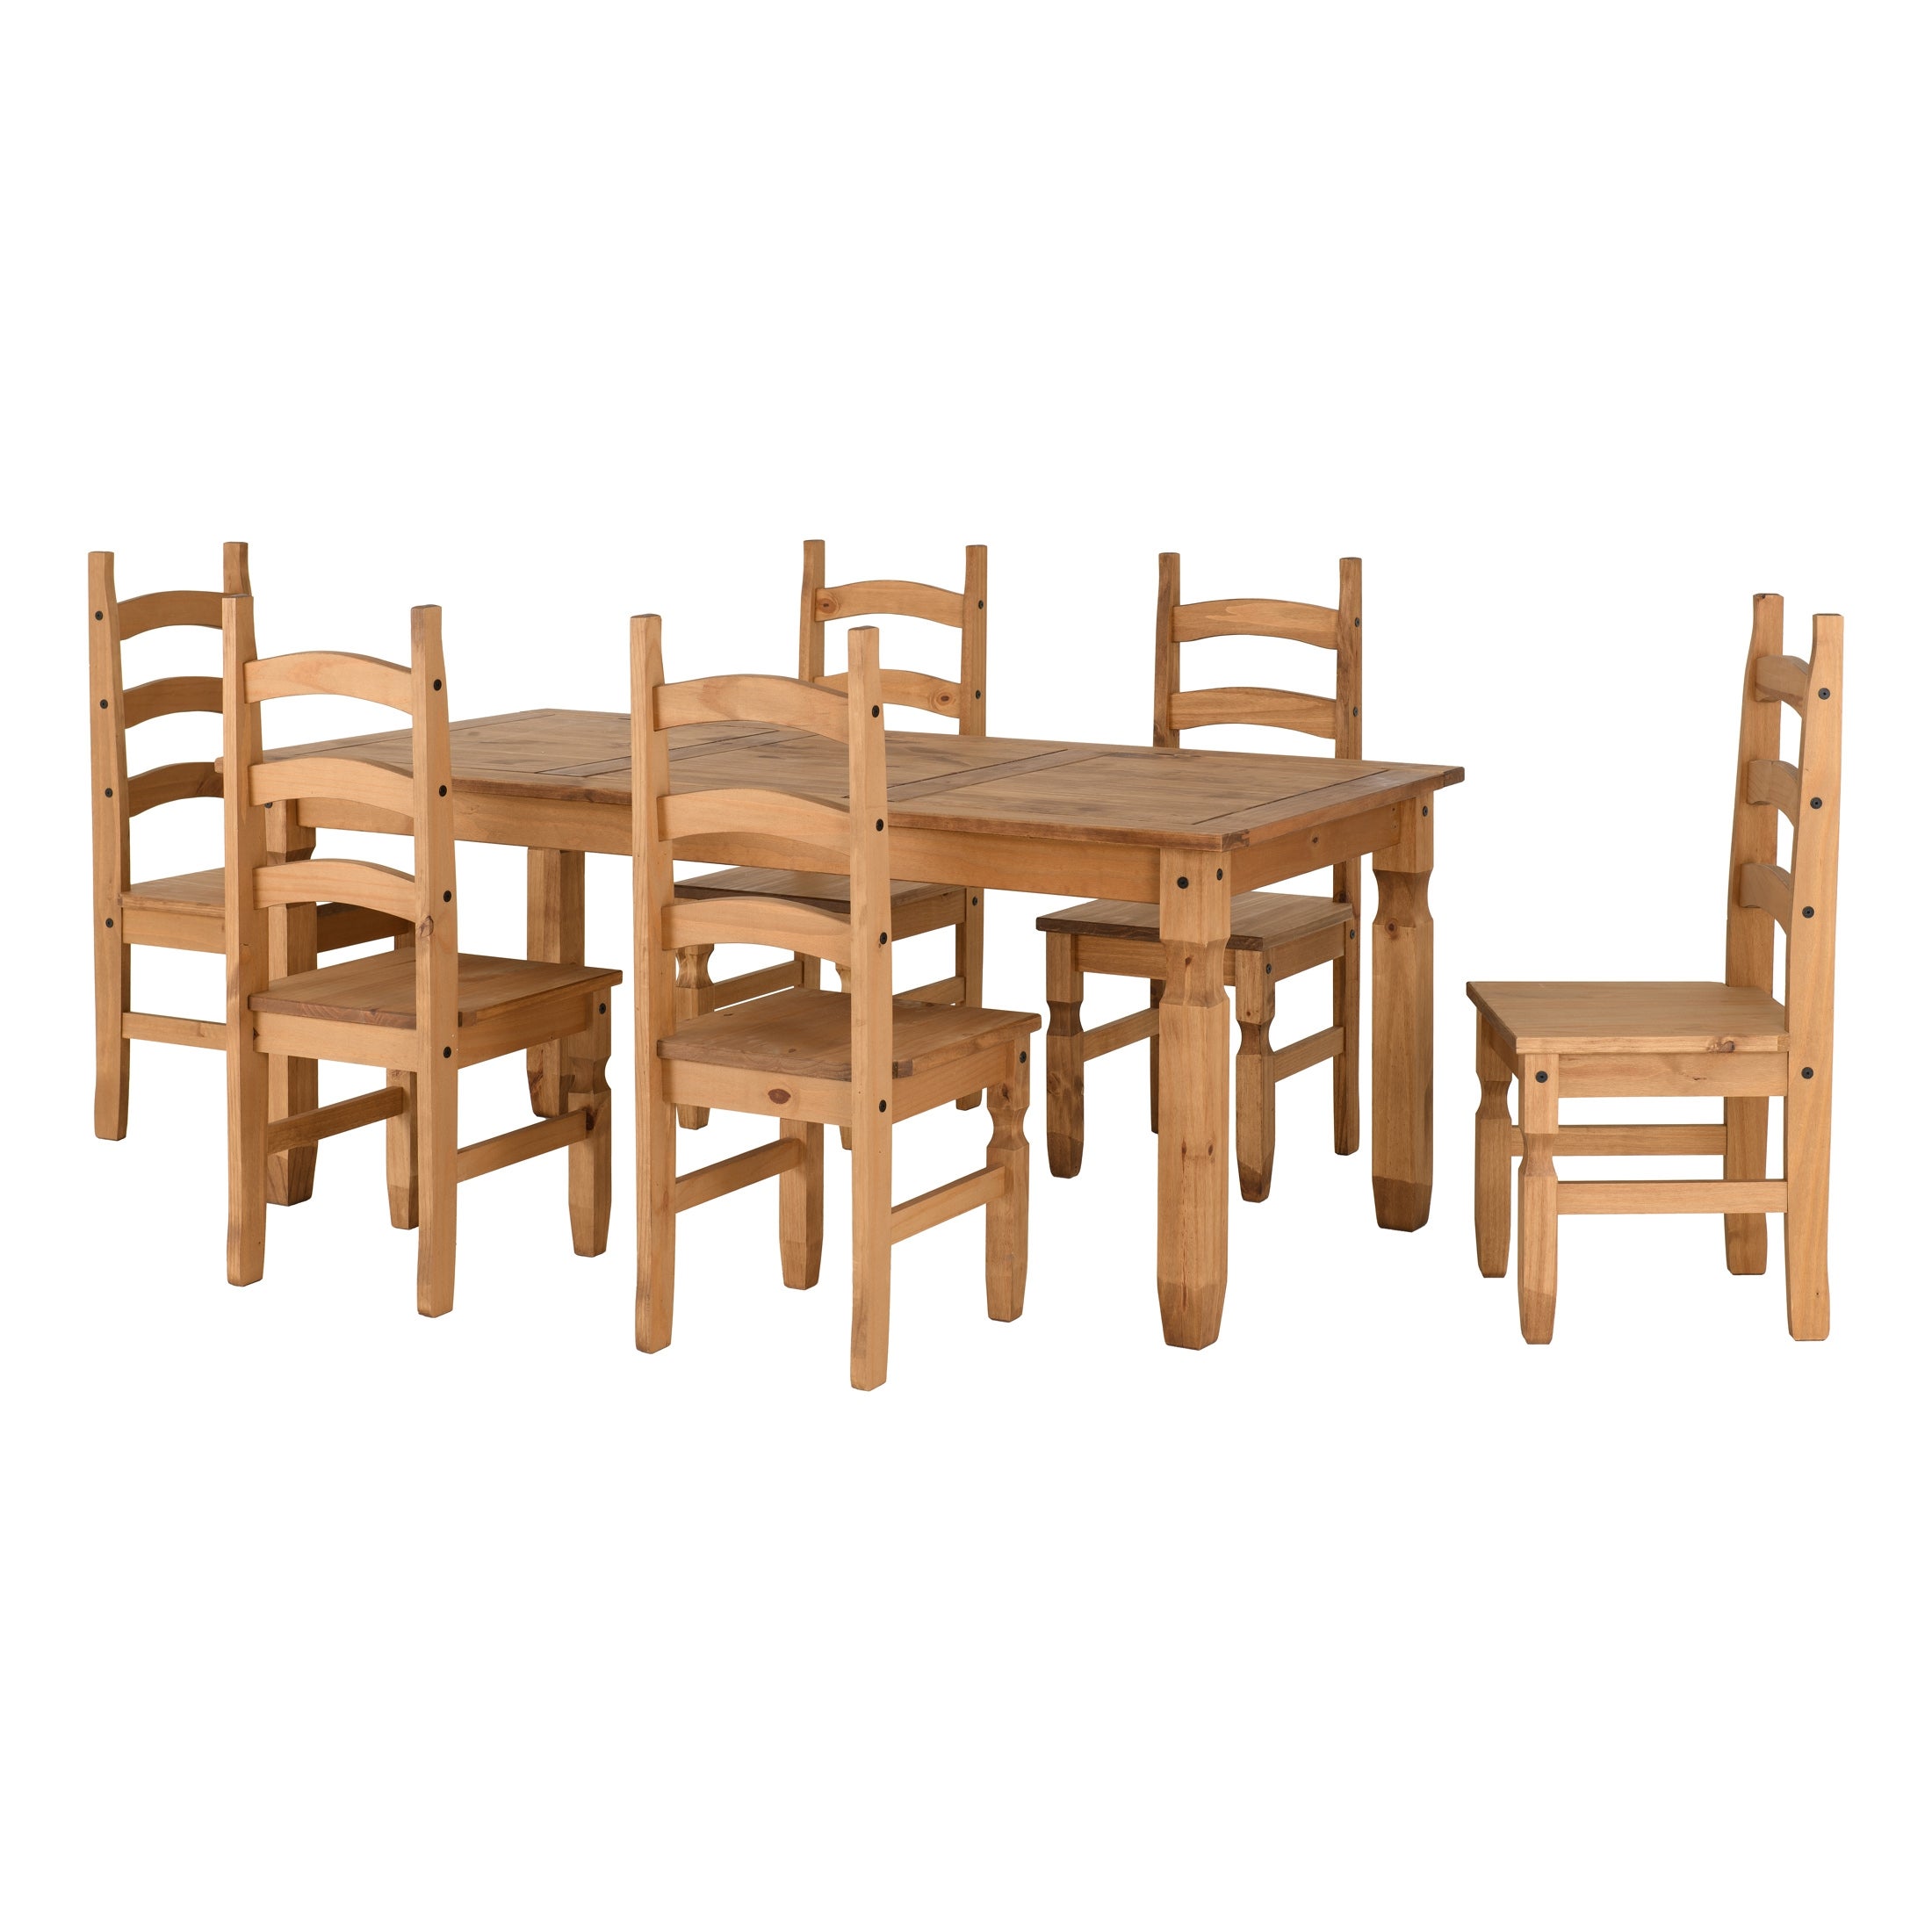 Corona Rectangular Dining Table with 6 Chairs Brown